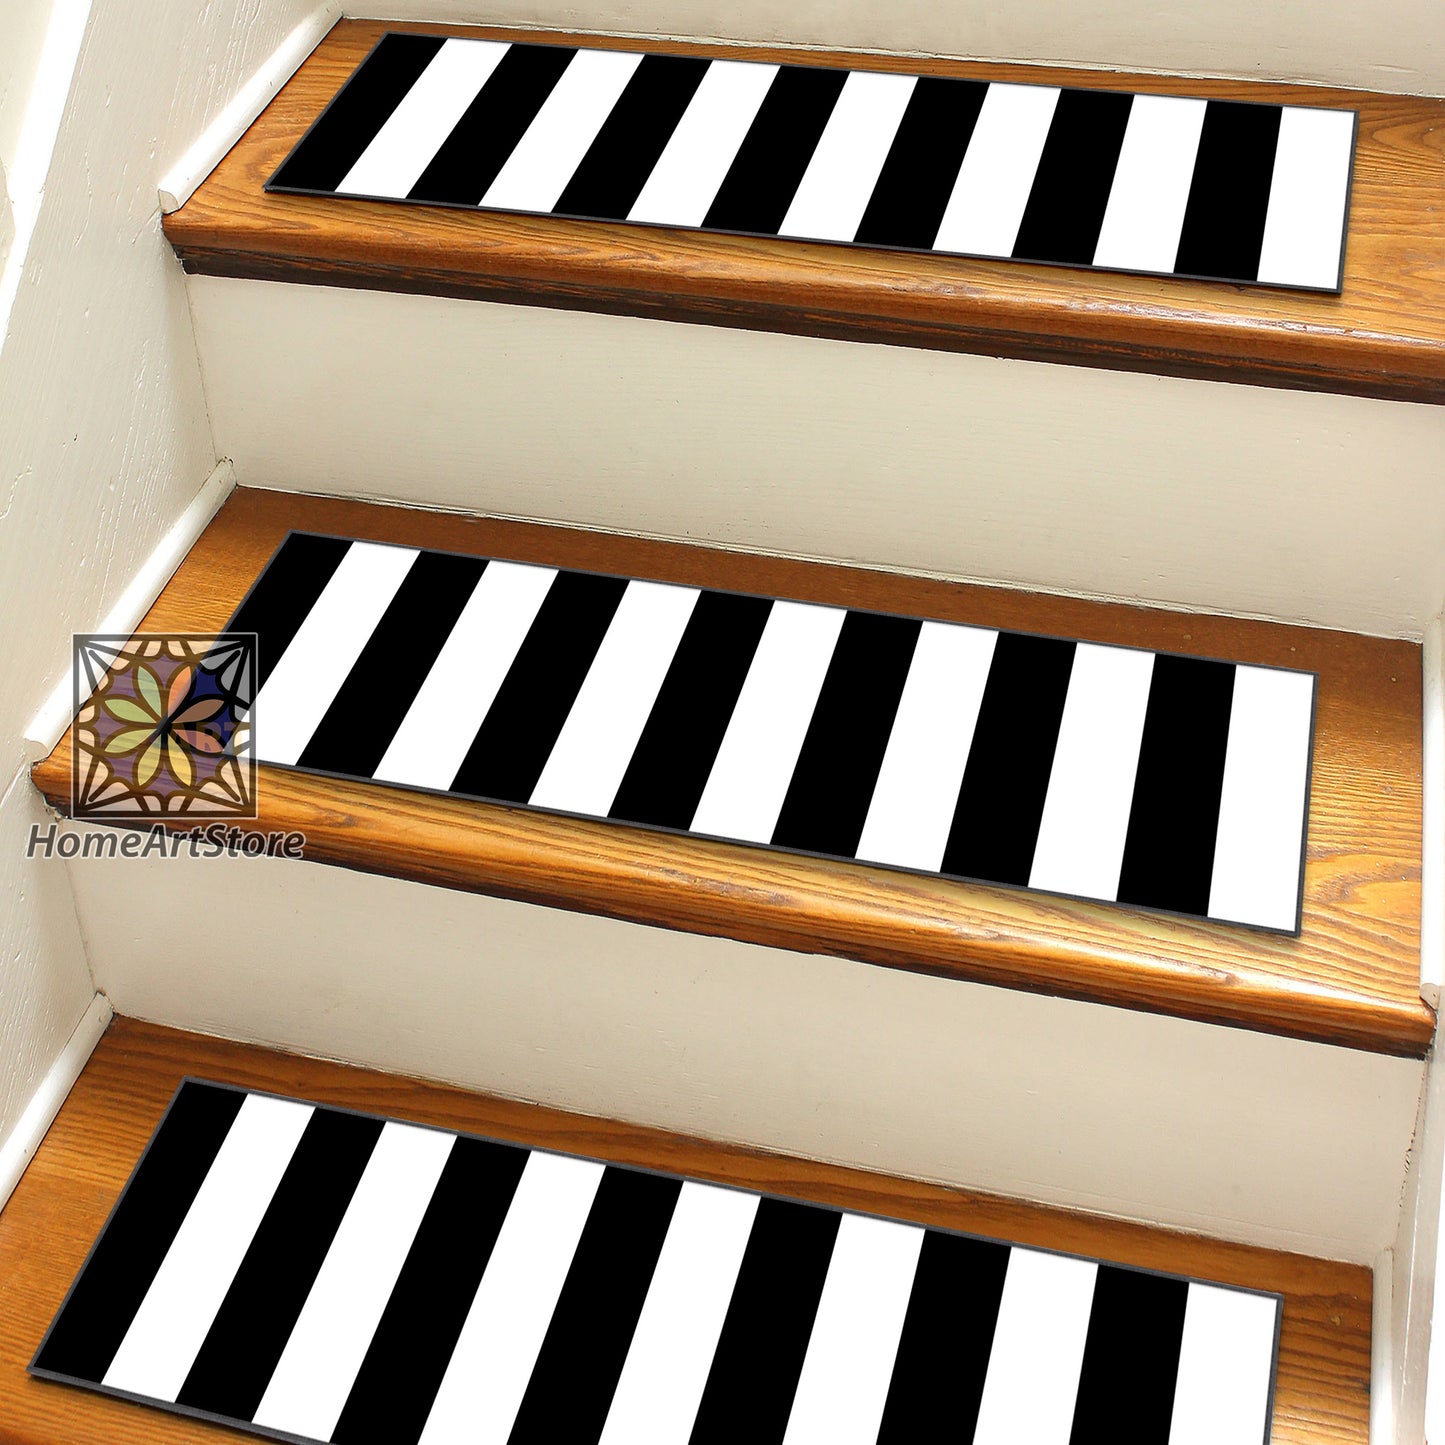 Striped Stair Step Rugs, Black and White Stair Mats, Modern Decorative Stair Carpet, Entryway Décor